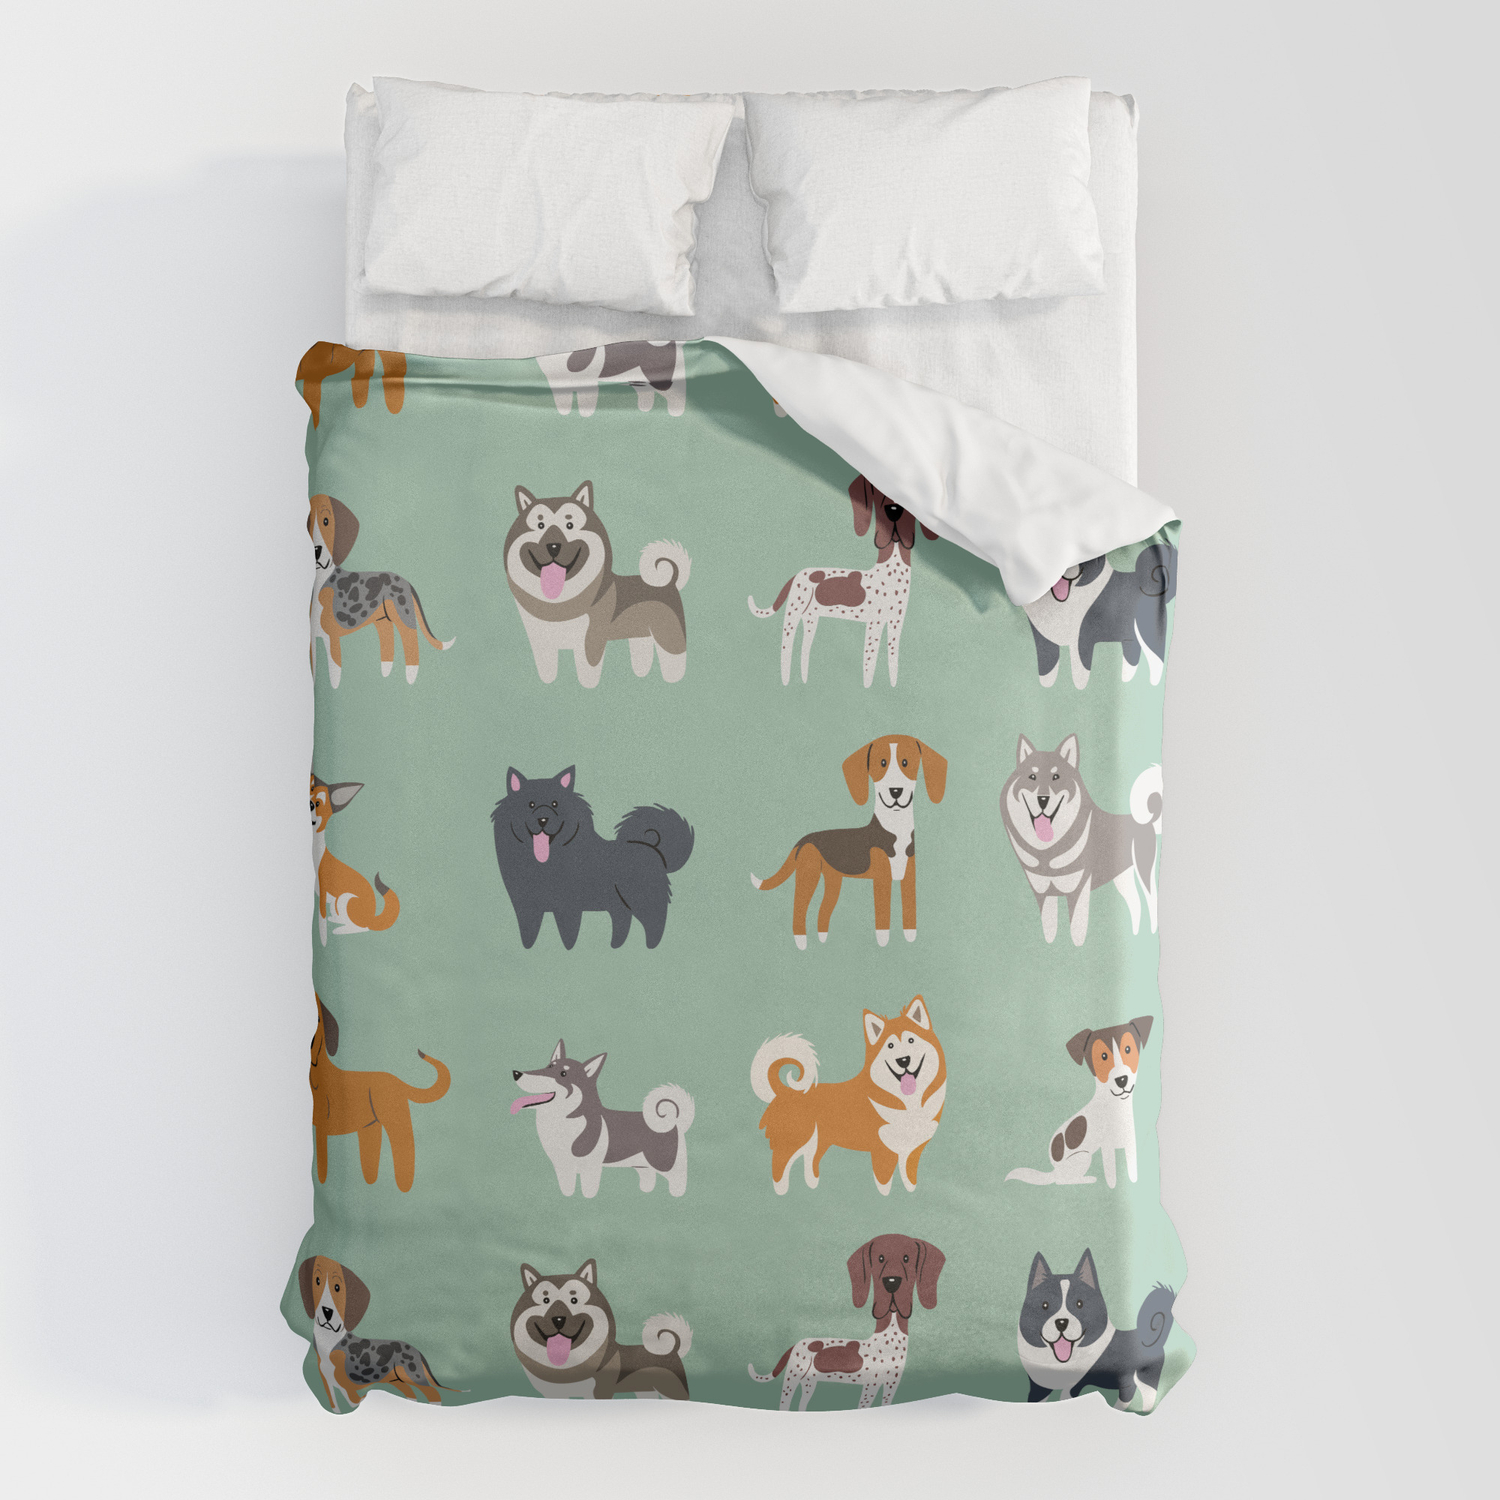 Nordic Dogs Duvet Cover By Doggie, Duvet Covers With Dogs On